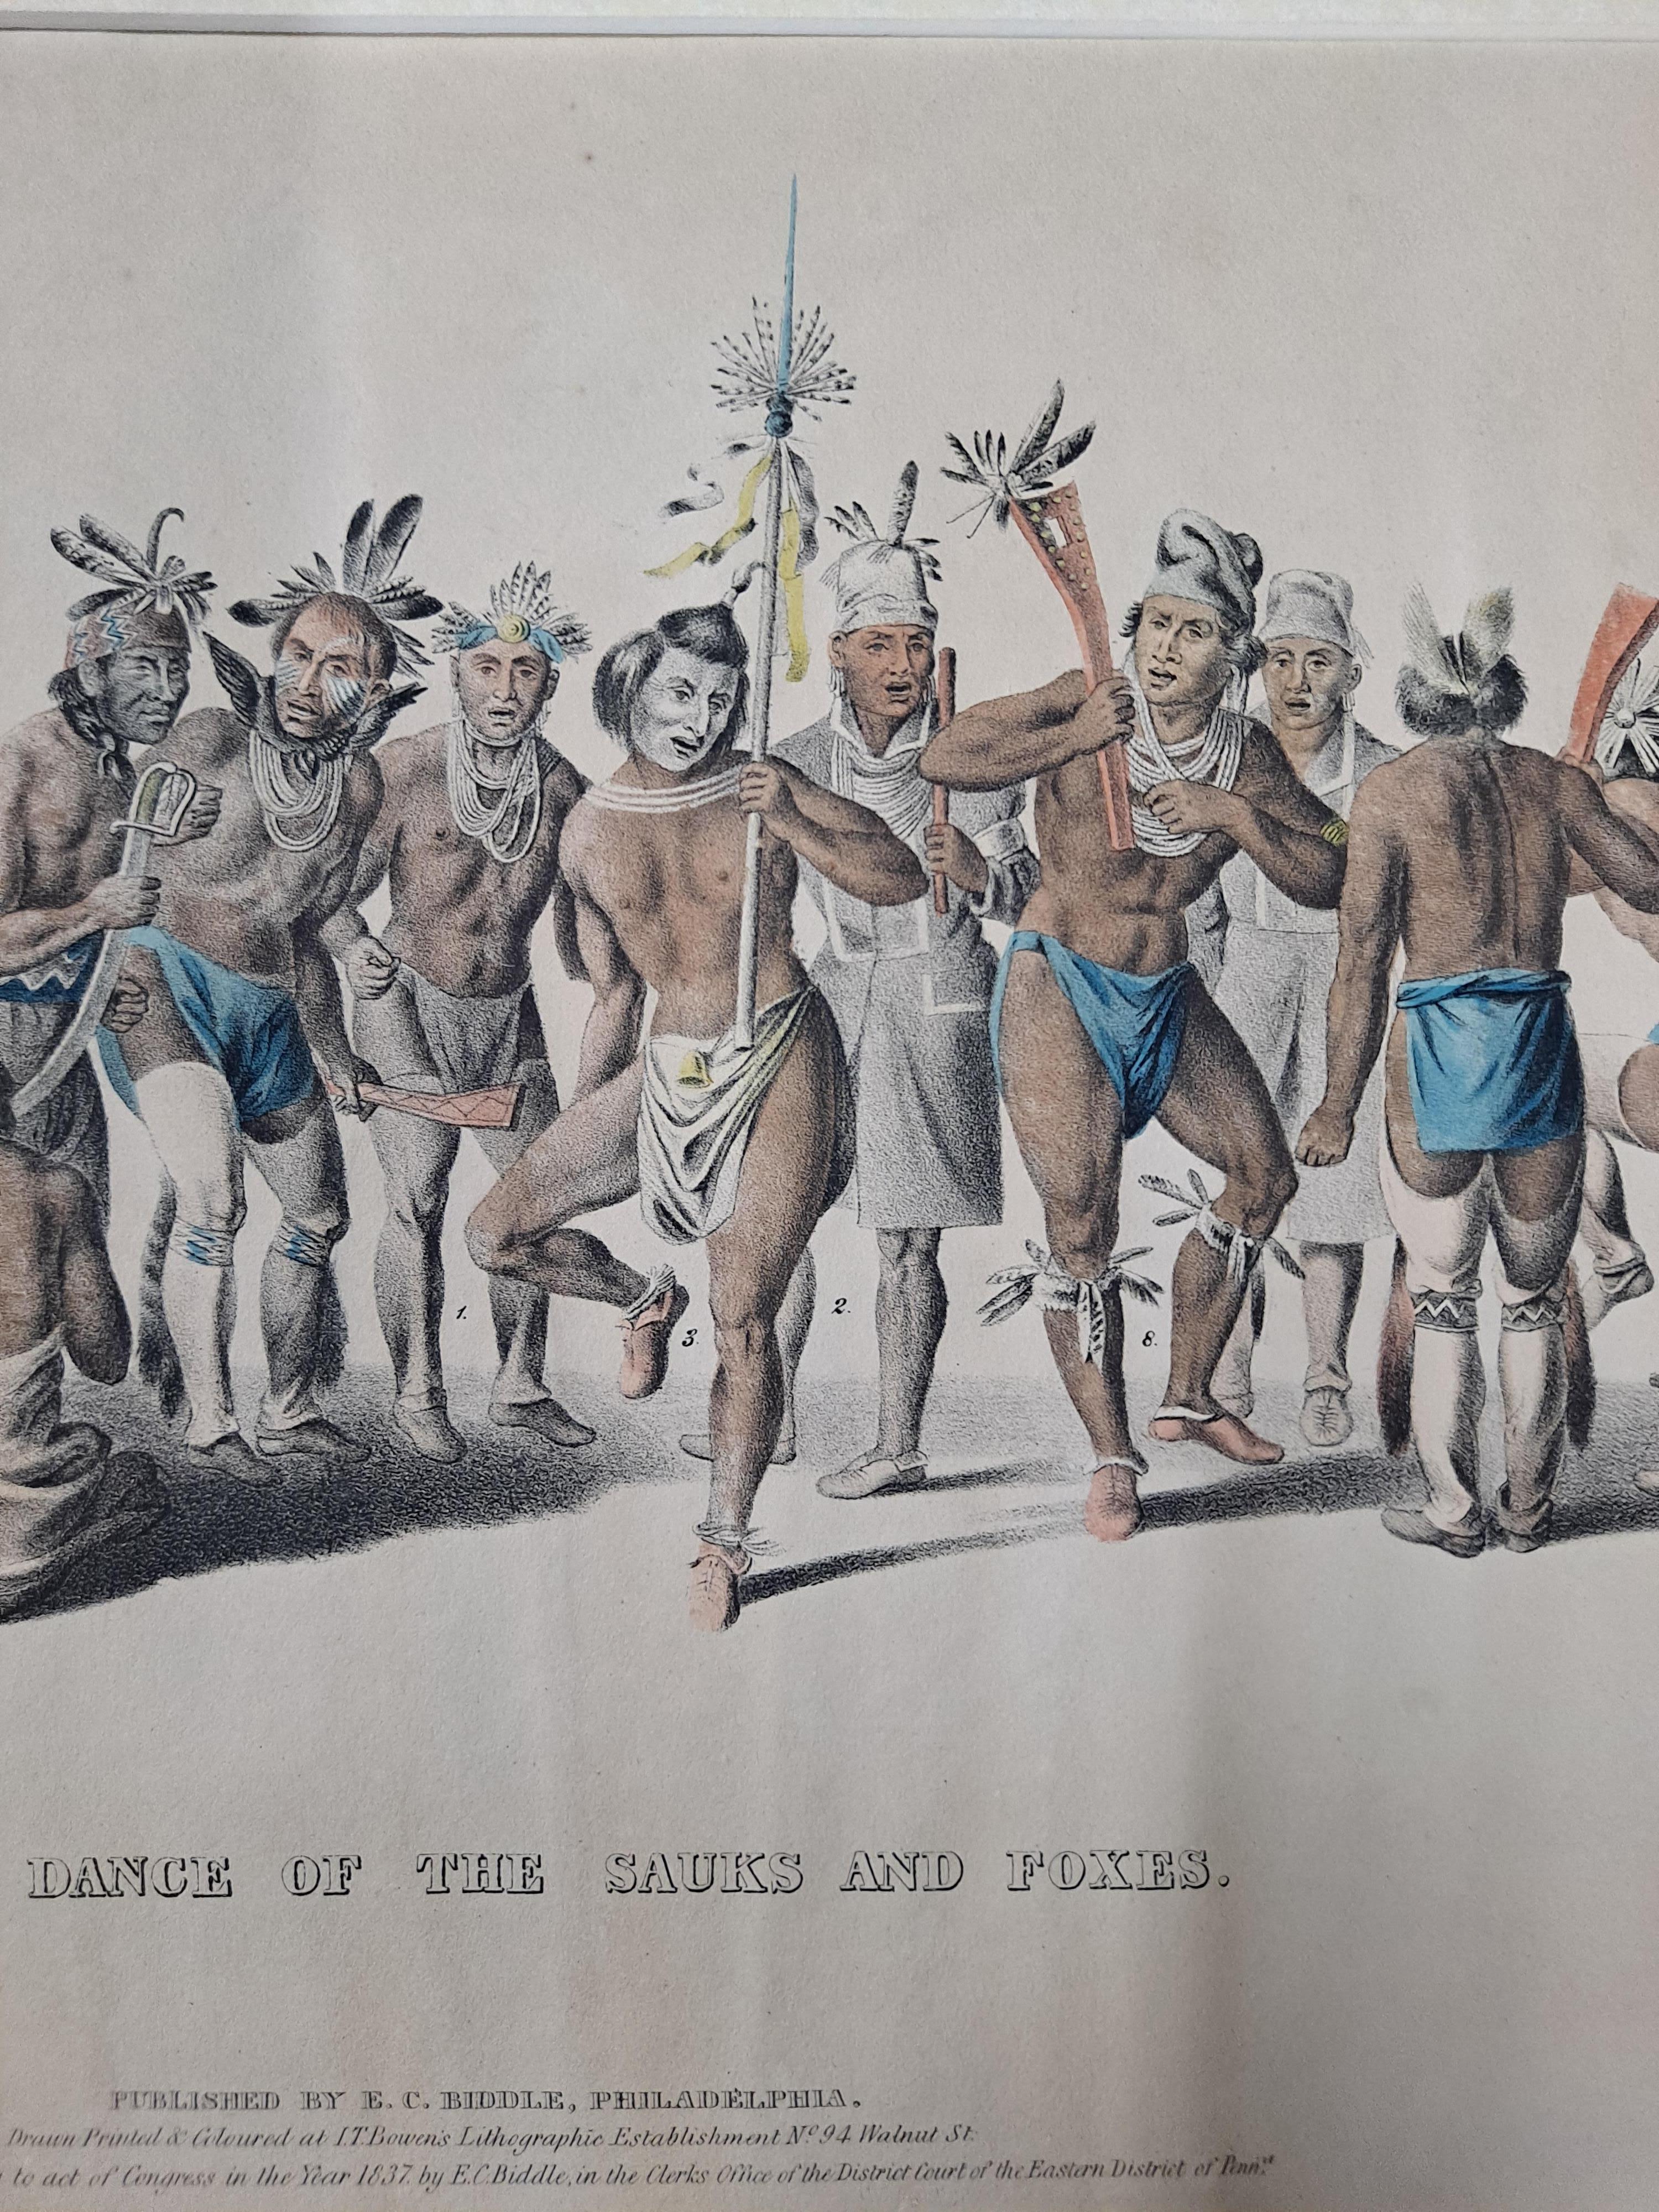 War Dance Of The Sauks And Foxes Hand Colored Lithograph c.1837

Published by E.C. Biddle, Philadelphia.

Beautiful hand colored lithograph from the 